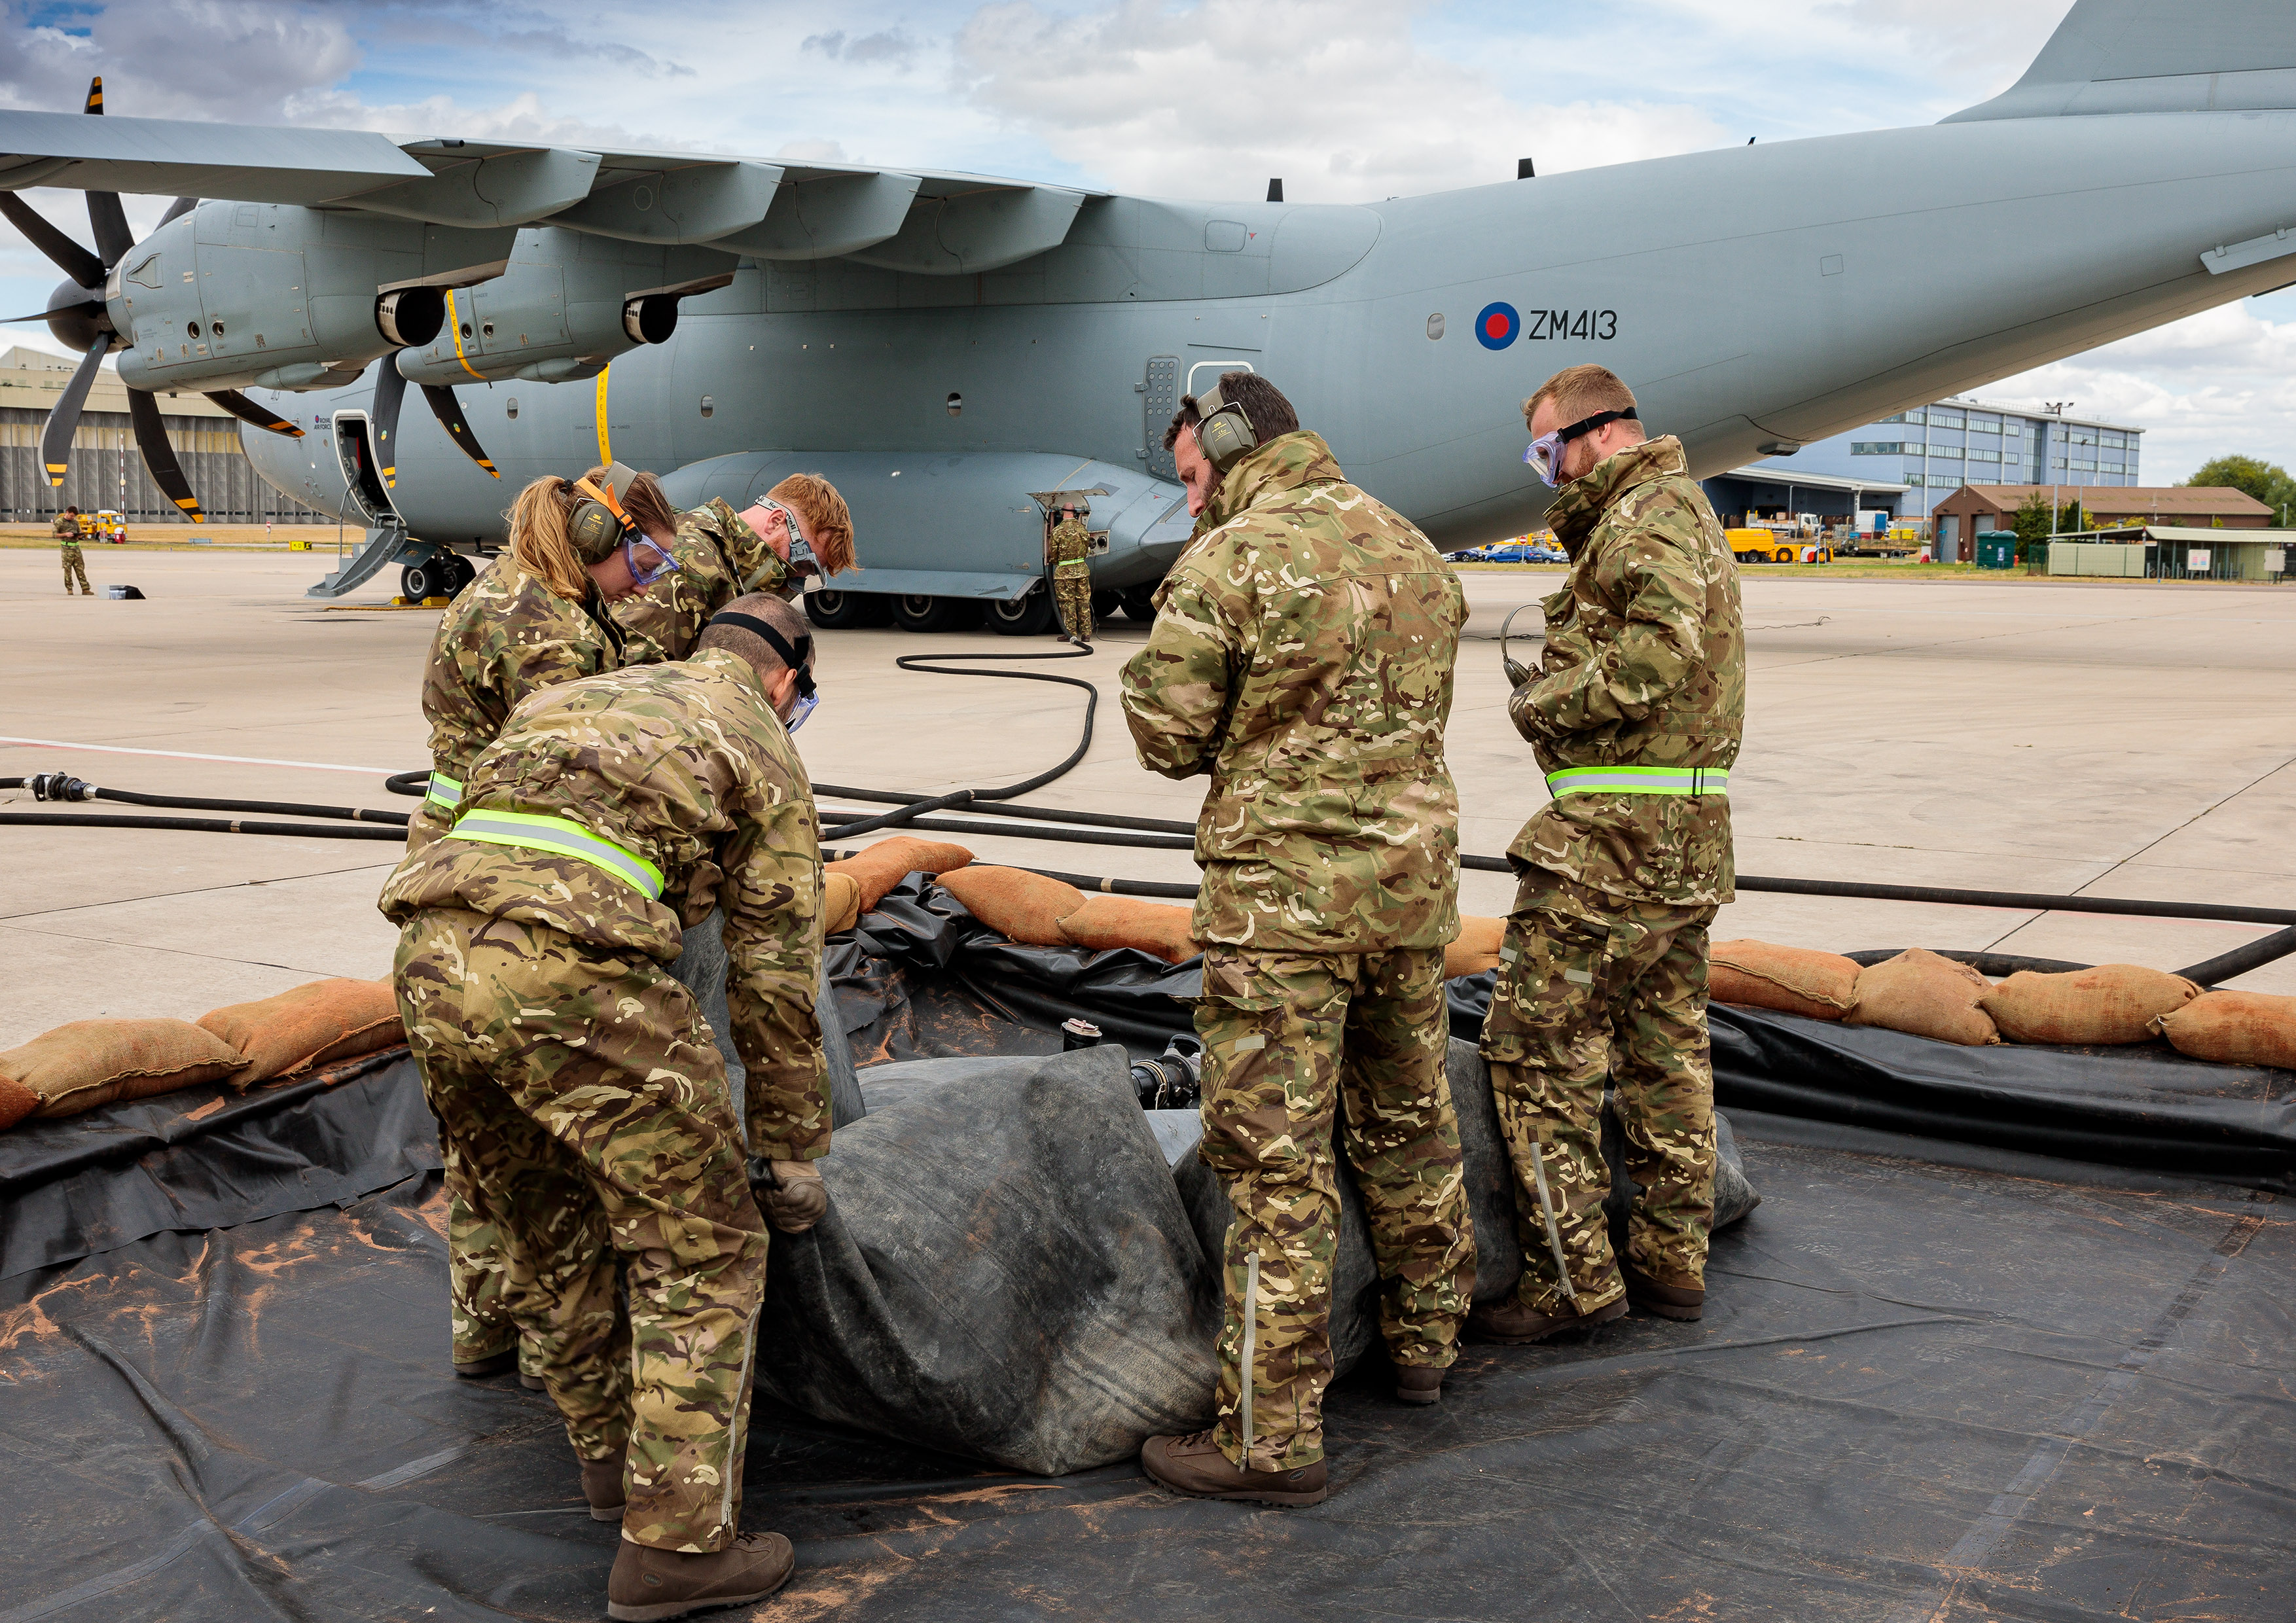 Image shows RAF aviators moving tarpaulin with Hercules aircraft in background. 